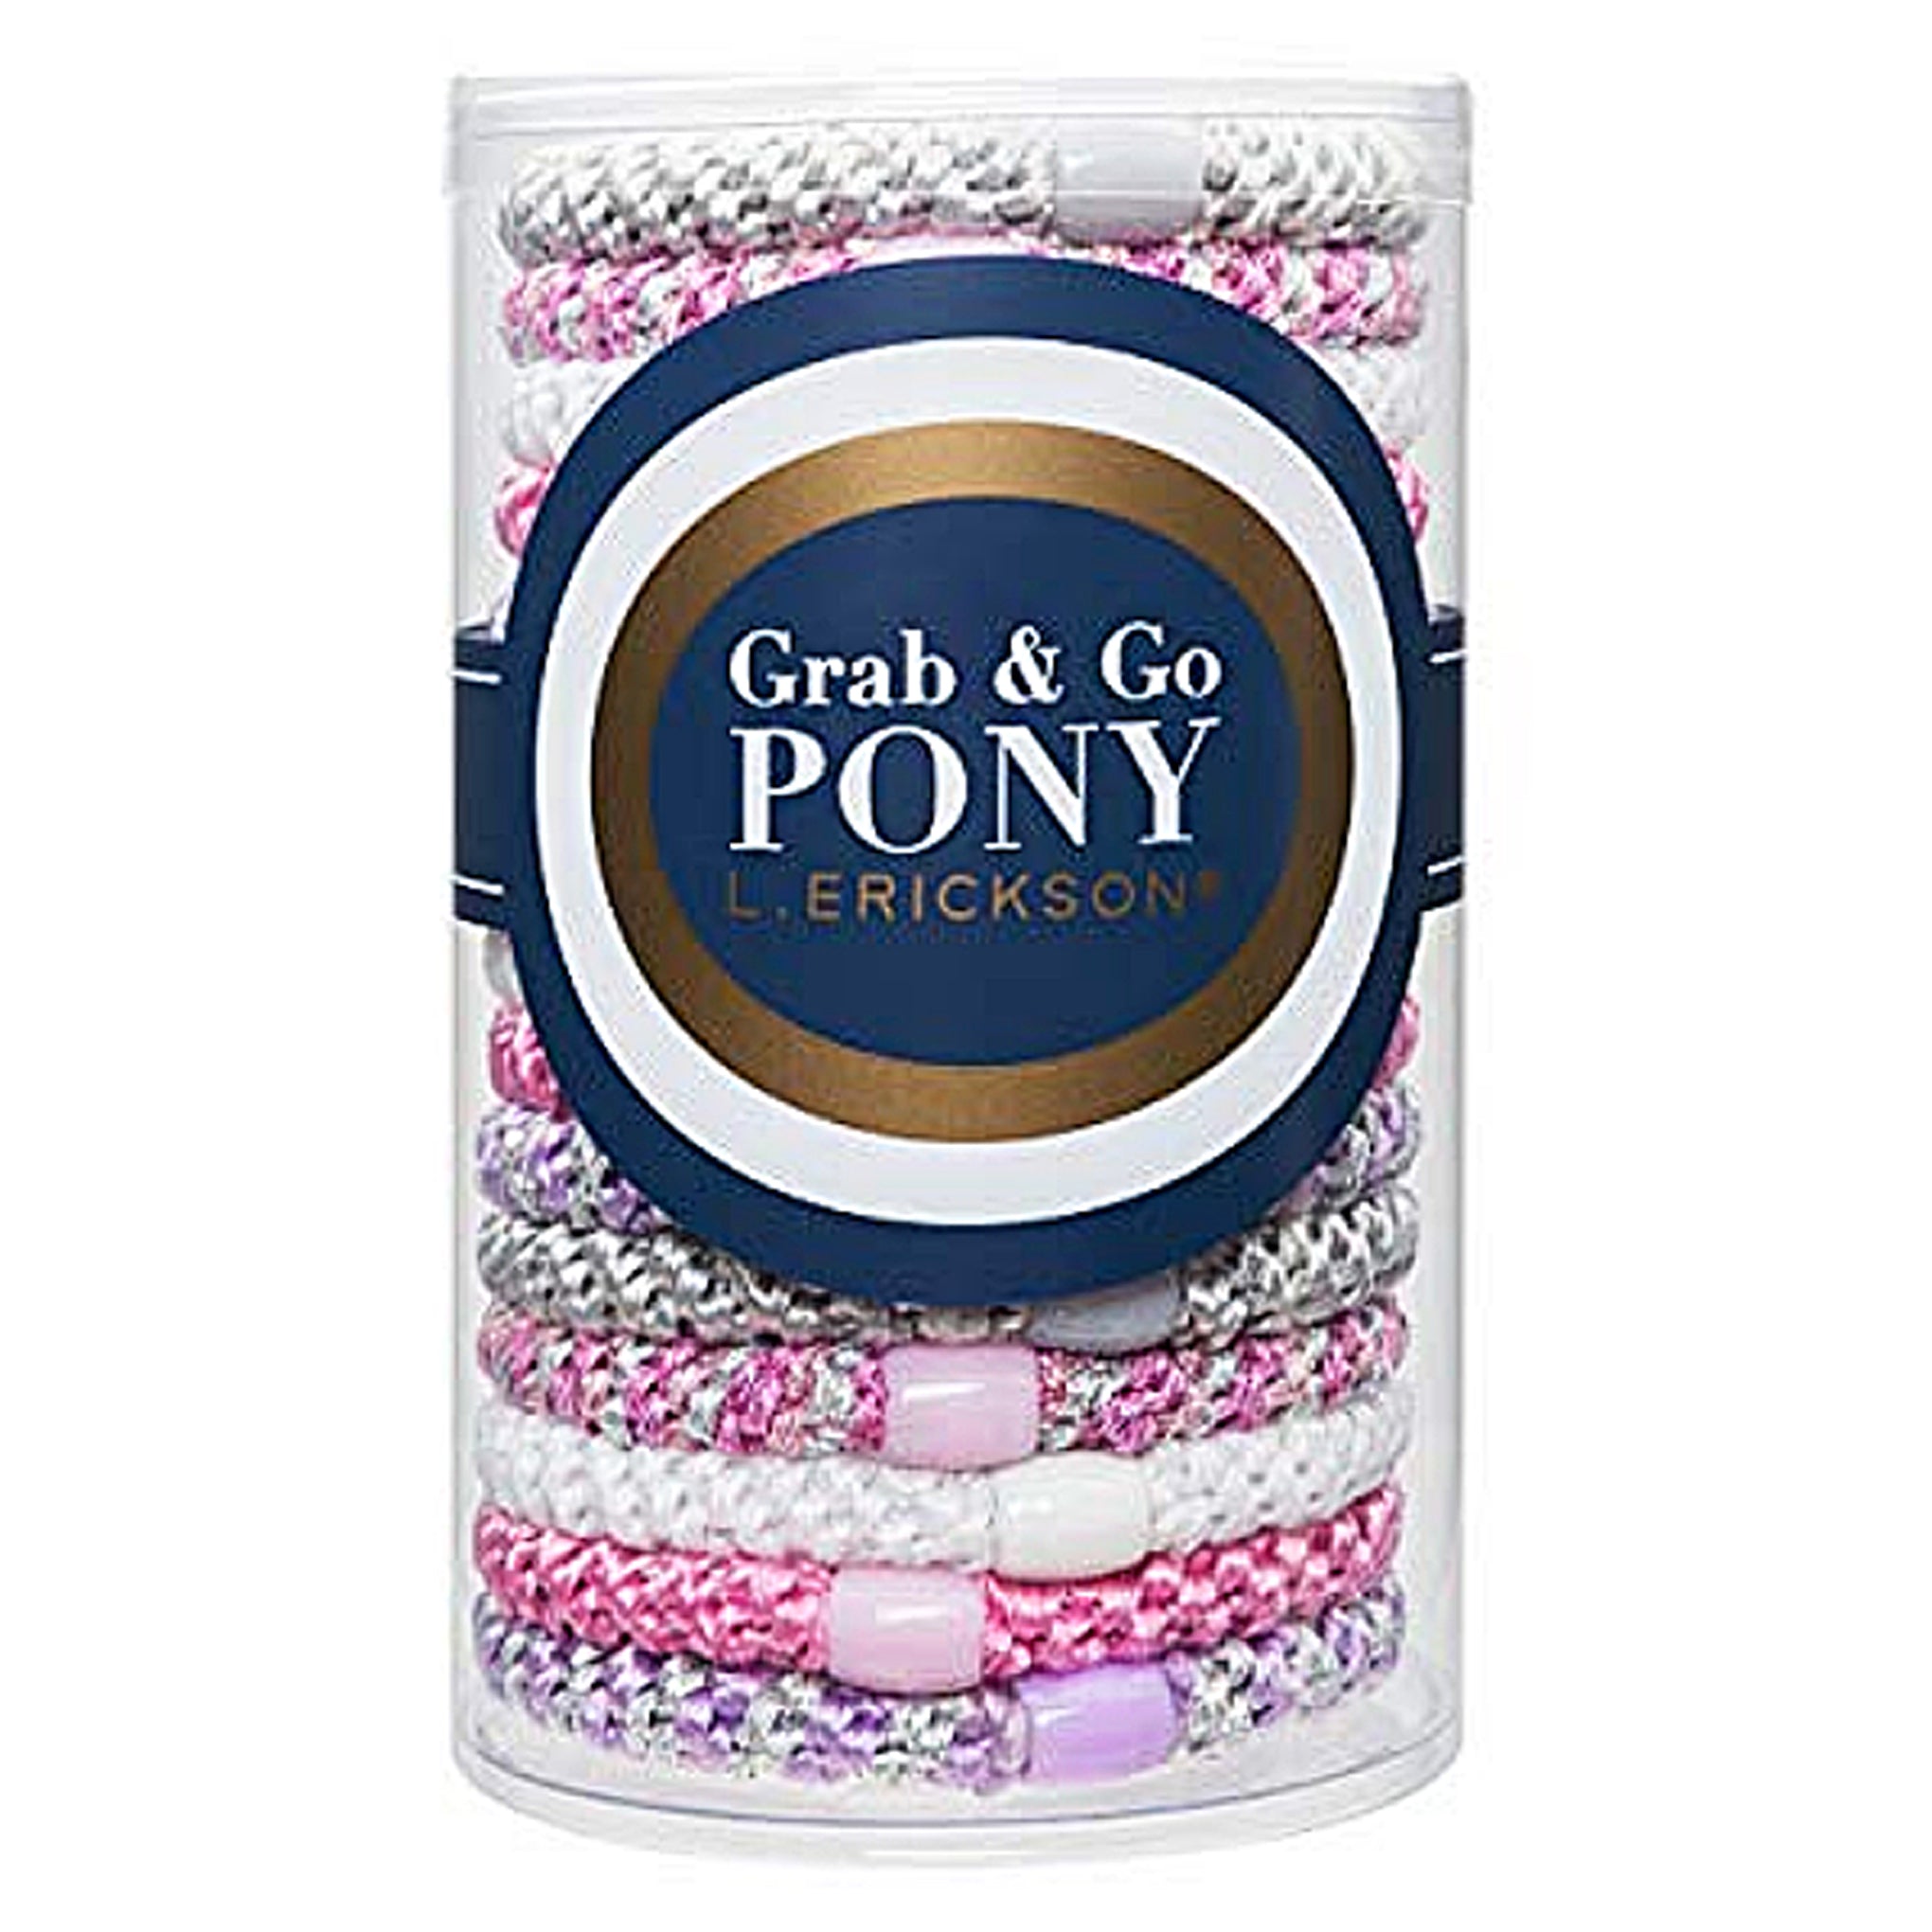 image of L. Erickson Grab and Go Pony Tube Hair Ties in Princess 15 Pack in gift tube